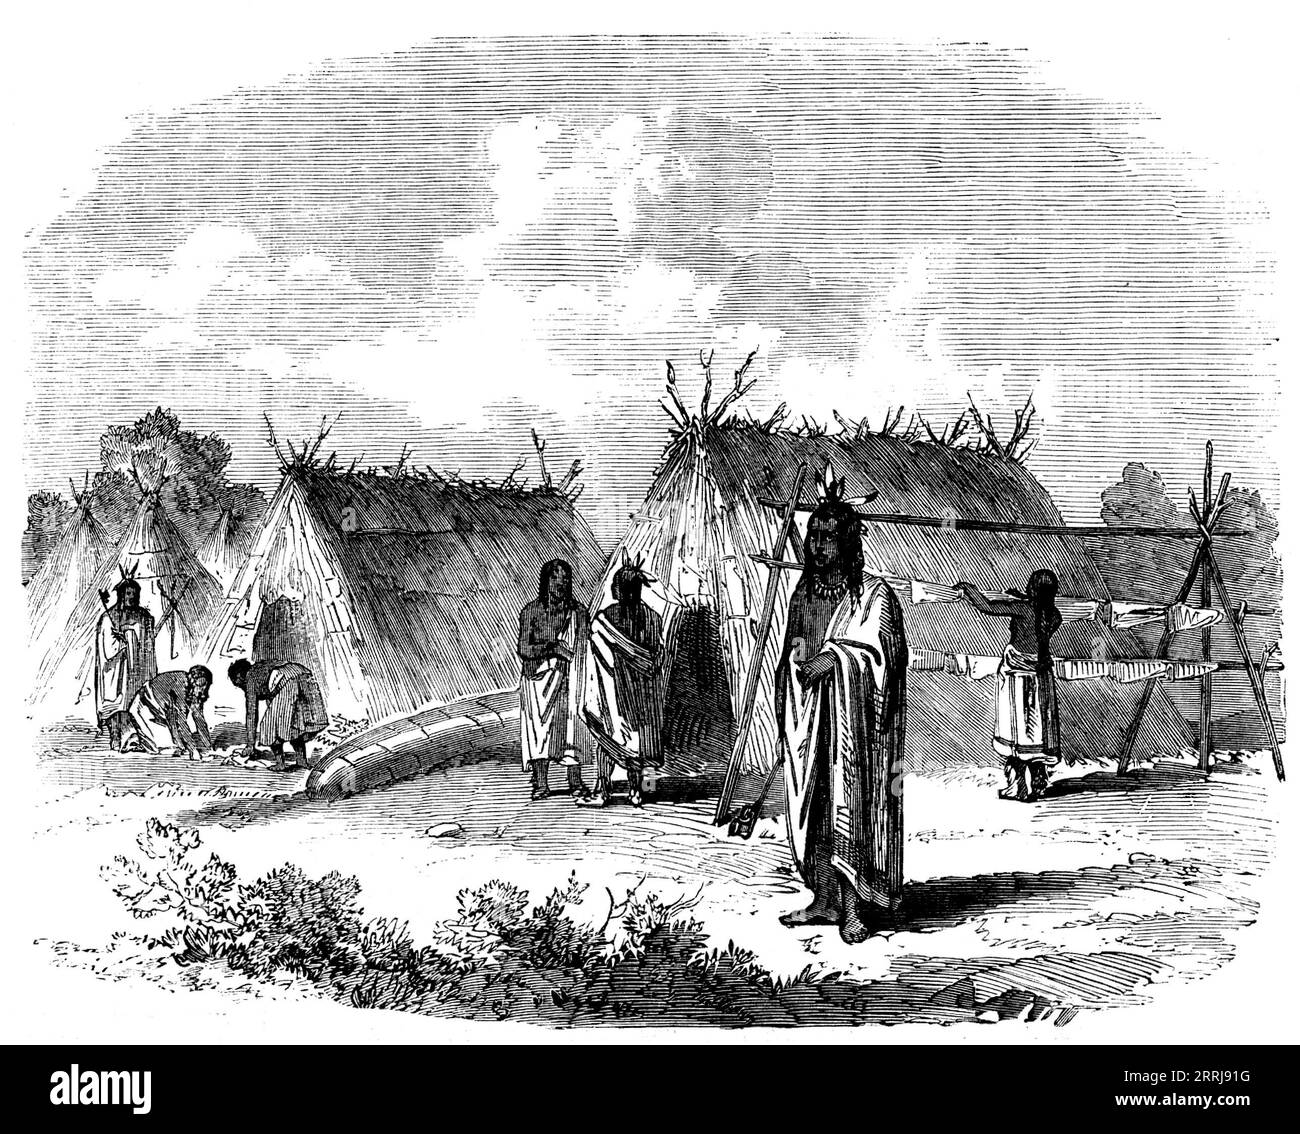 The Assiniboine and Saskatchewan Exploring Expedition - Ojibway Encampment near the Falls of the Rainy River, 1858. The Ojibways of the Lake of the Woods are the most warlike and independent tribe of this once great and powerful nation, which formerly occupied the country between Lake Huron and Red River. They still number some hundreds on the beautiful lake...from which their name is derived. Among them men of tall stature and faultless form are not uncommon. The Engraving represents a part of an encampment at the falls of Rainy River, where they assemble in the spring to catch and dry sturge Stock Photo